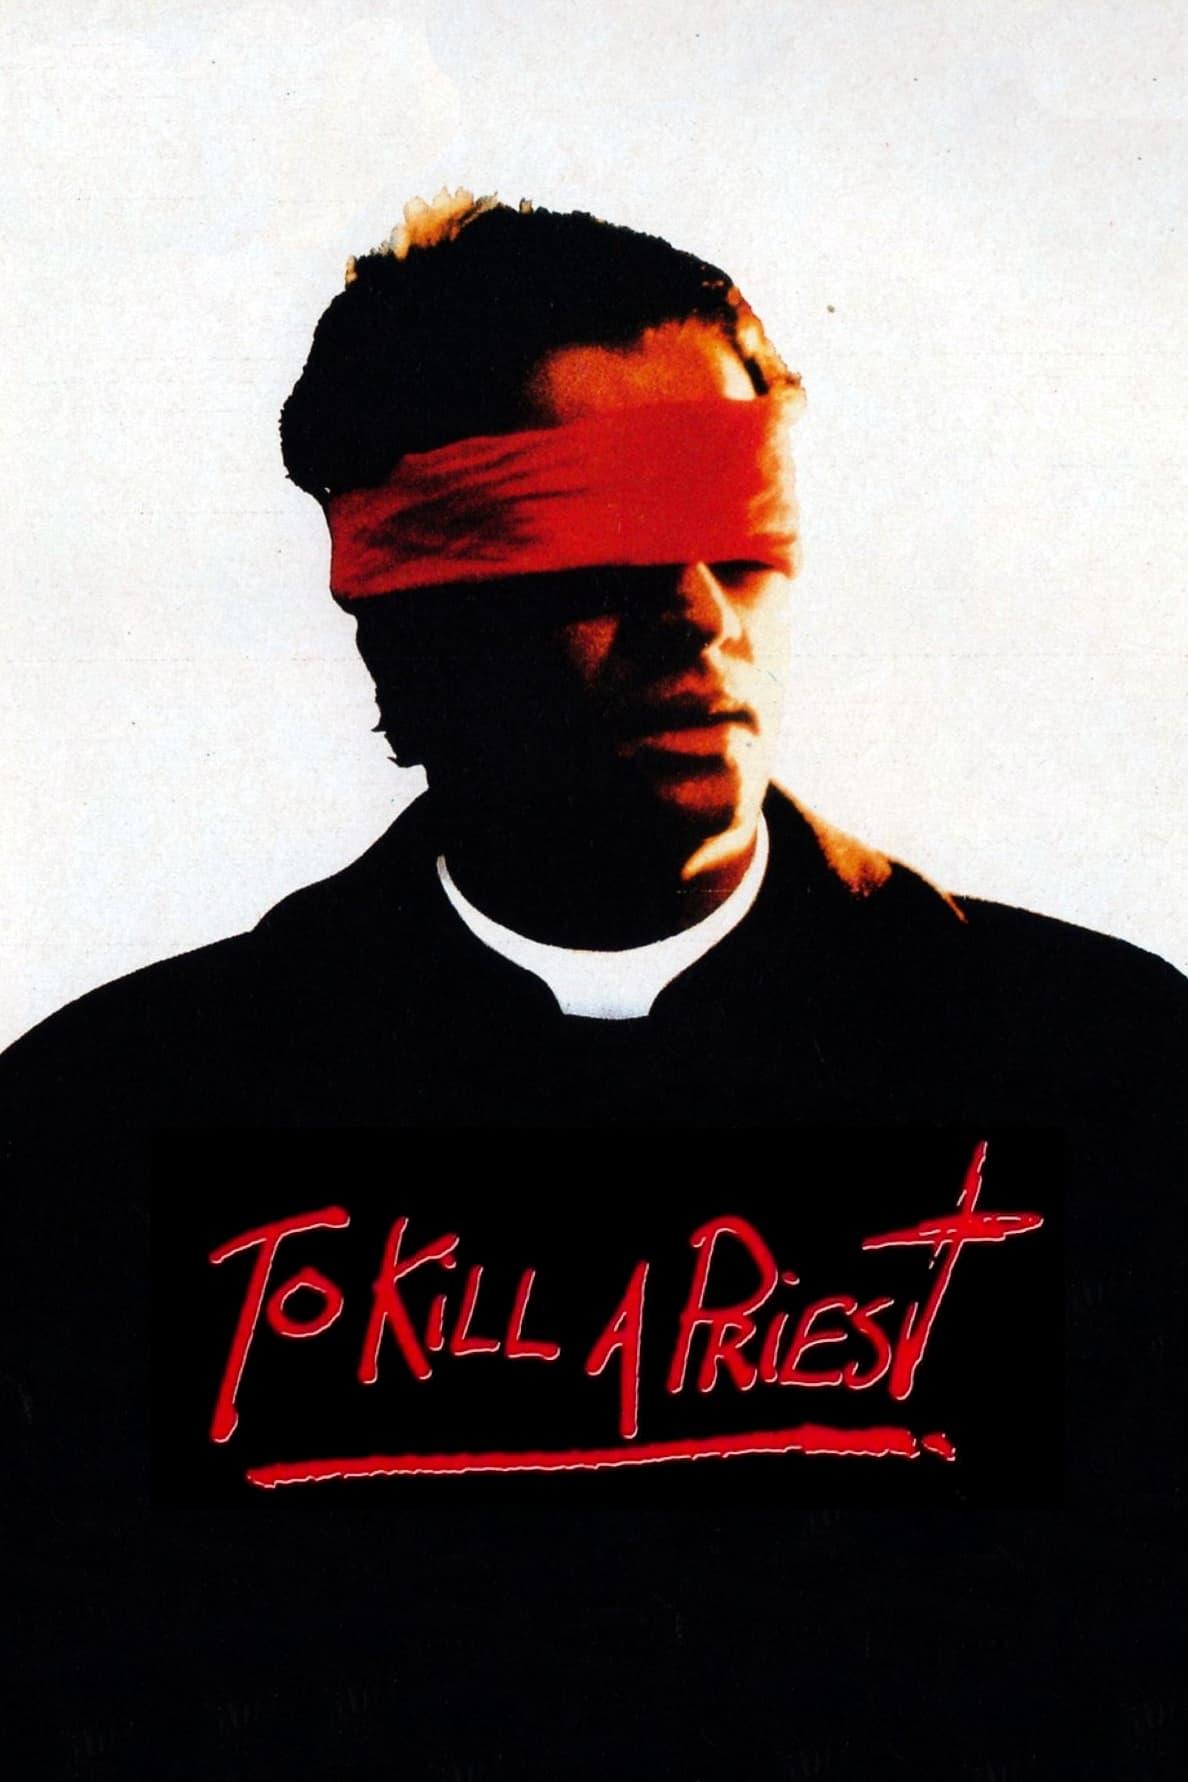 To Kill a Priest poster